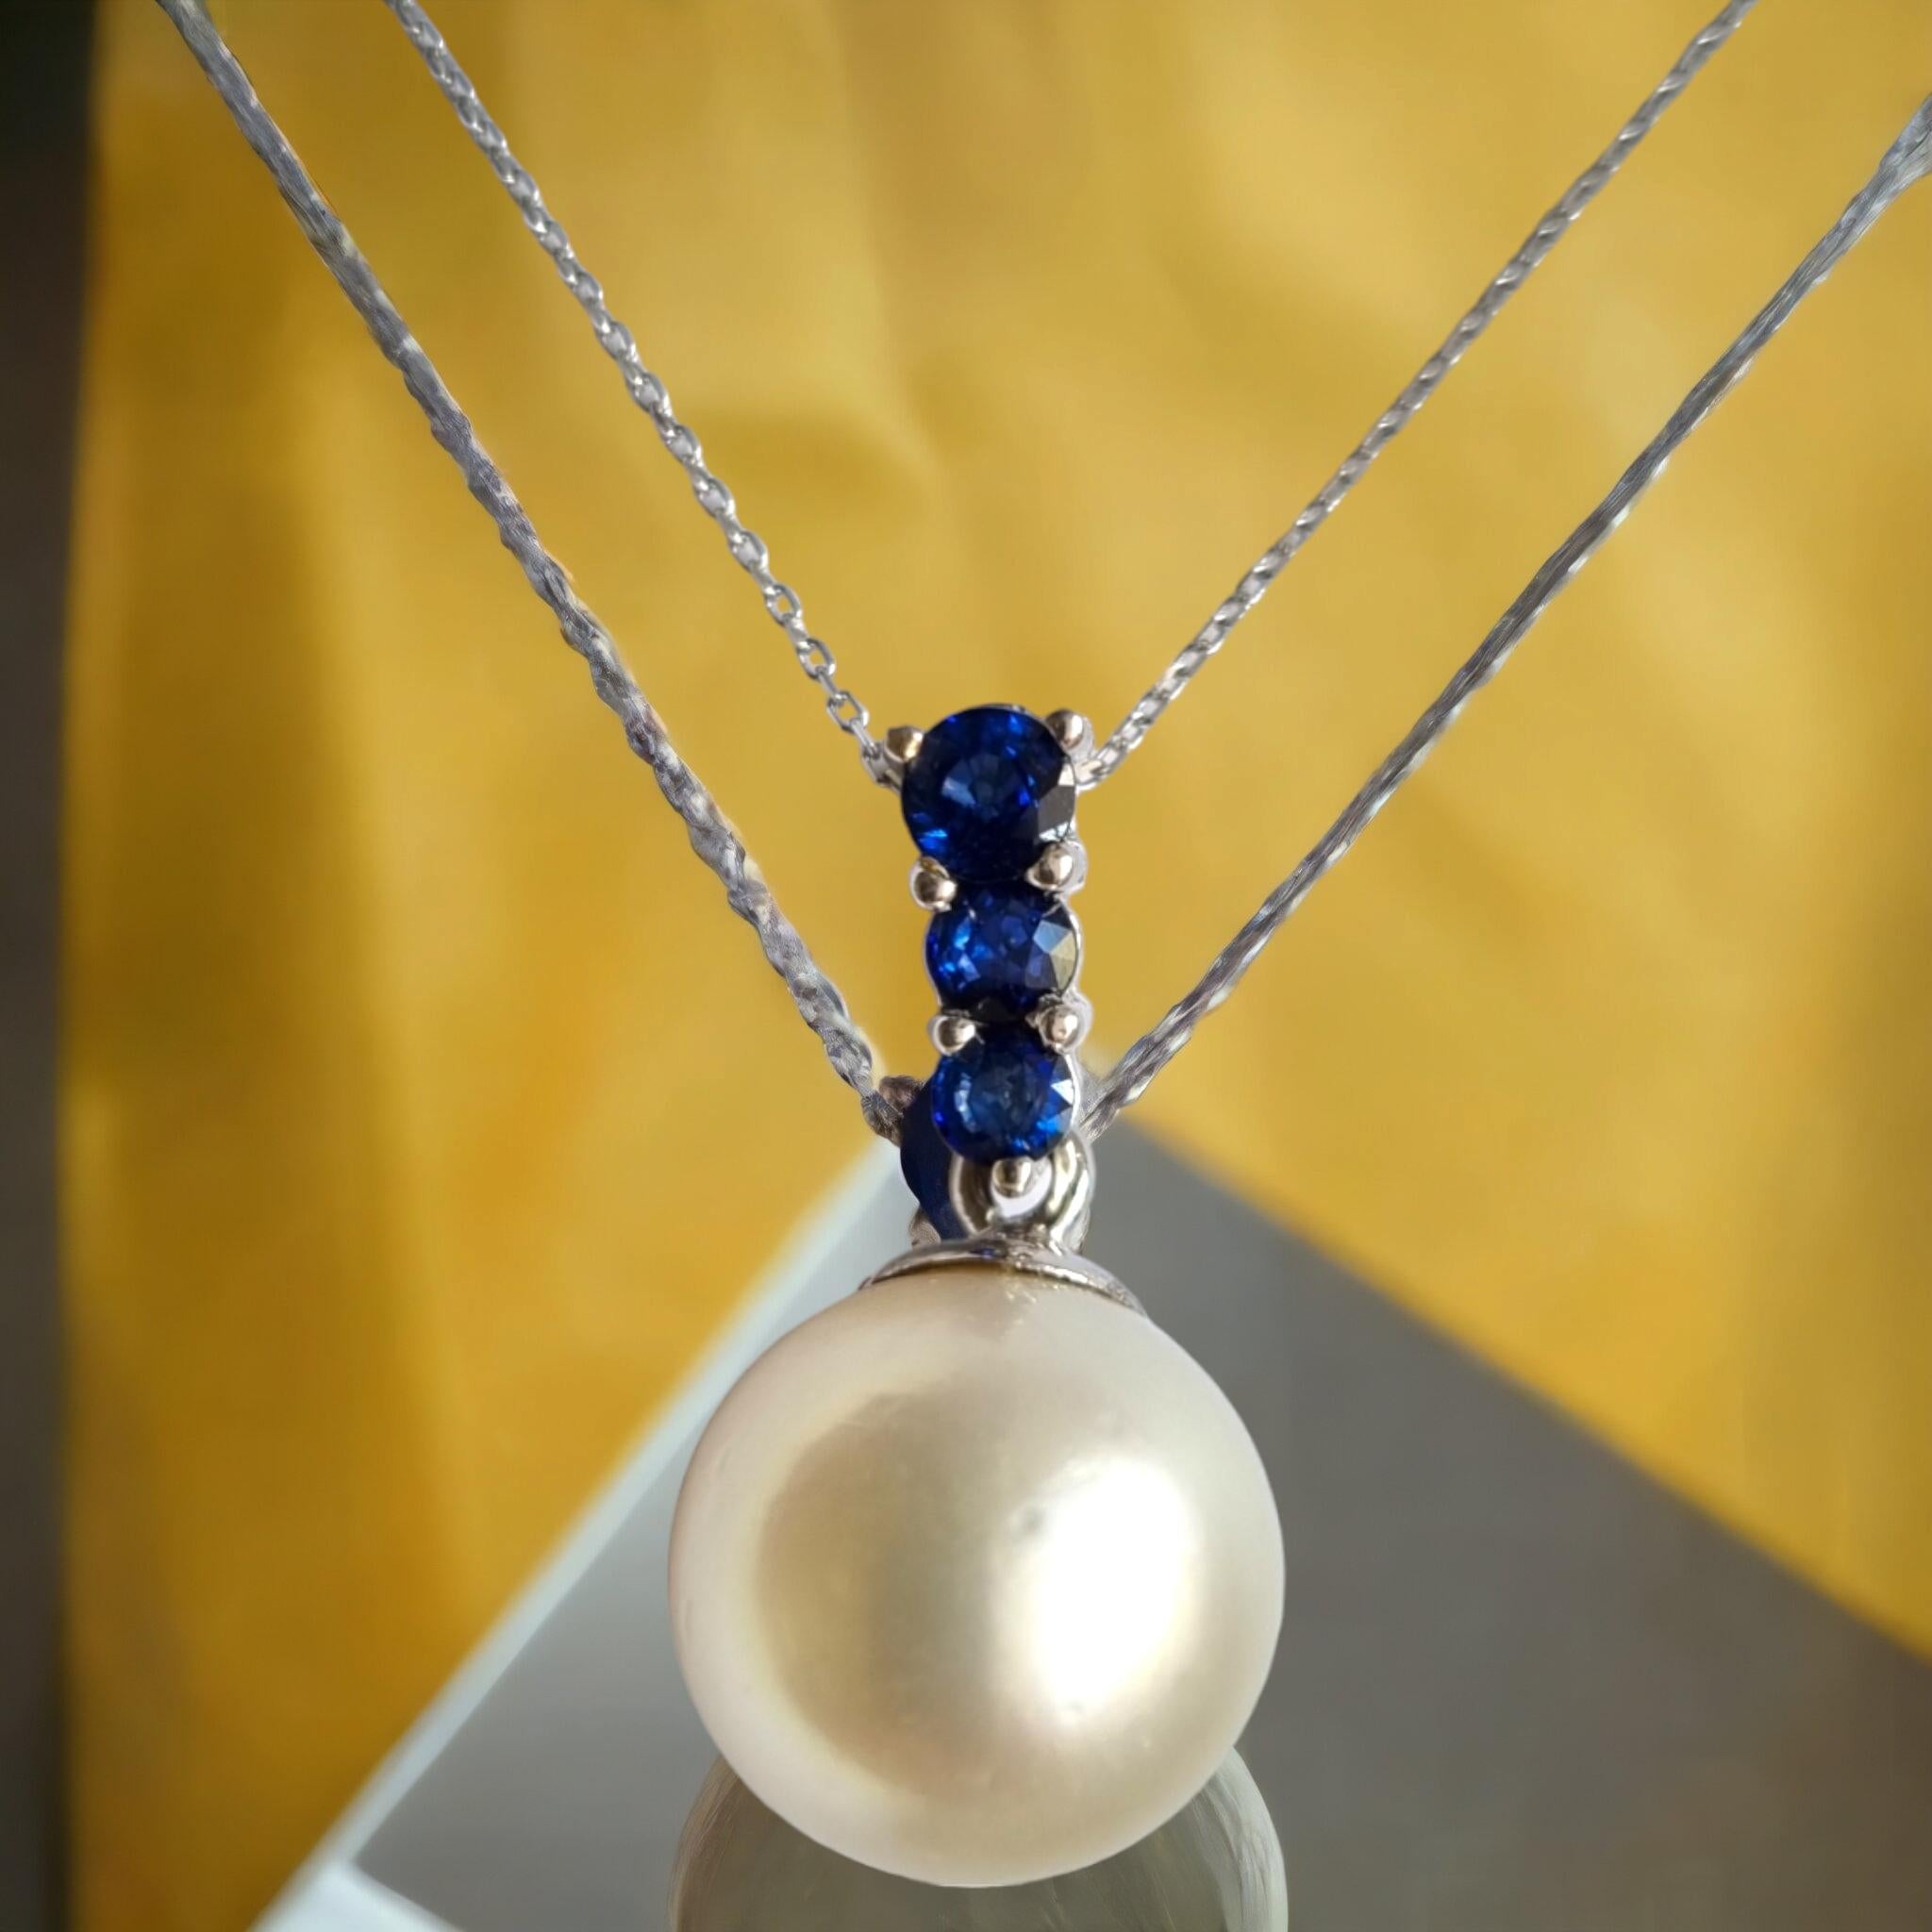 GIA Certified South Sea Pearl and Blue Sapphire Pendant.
South Sea Pearl diameter 14mm, weighing 19,51 carats. GIA report number  6162646020 4-1 engraved. Pearl characteristics: round shape, white color, bead cultured saltwater pearl with a good